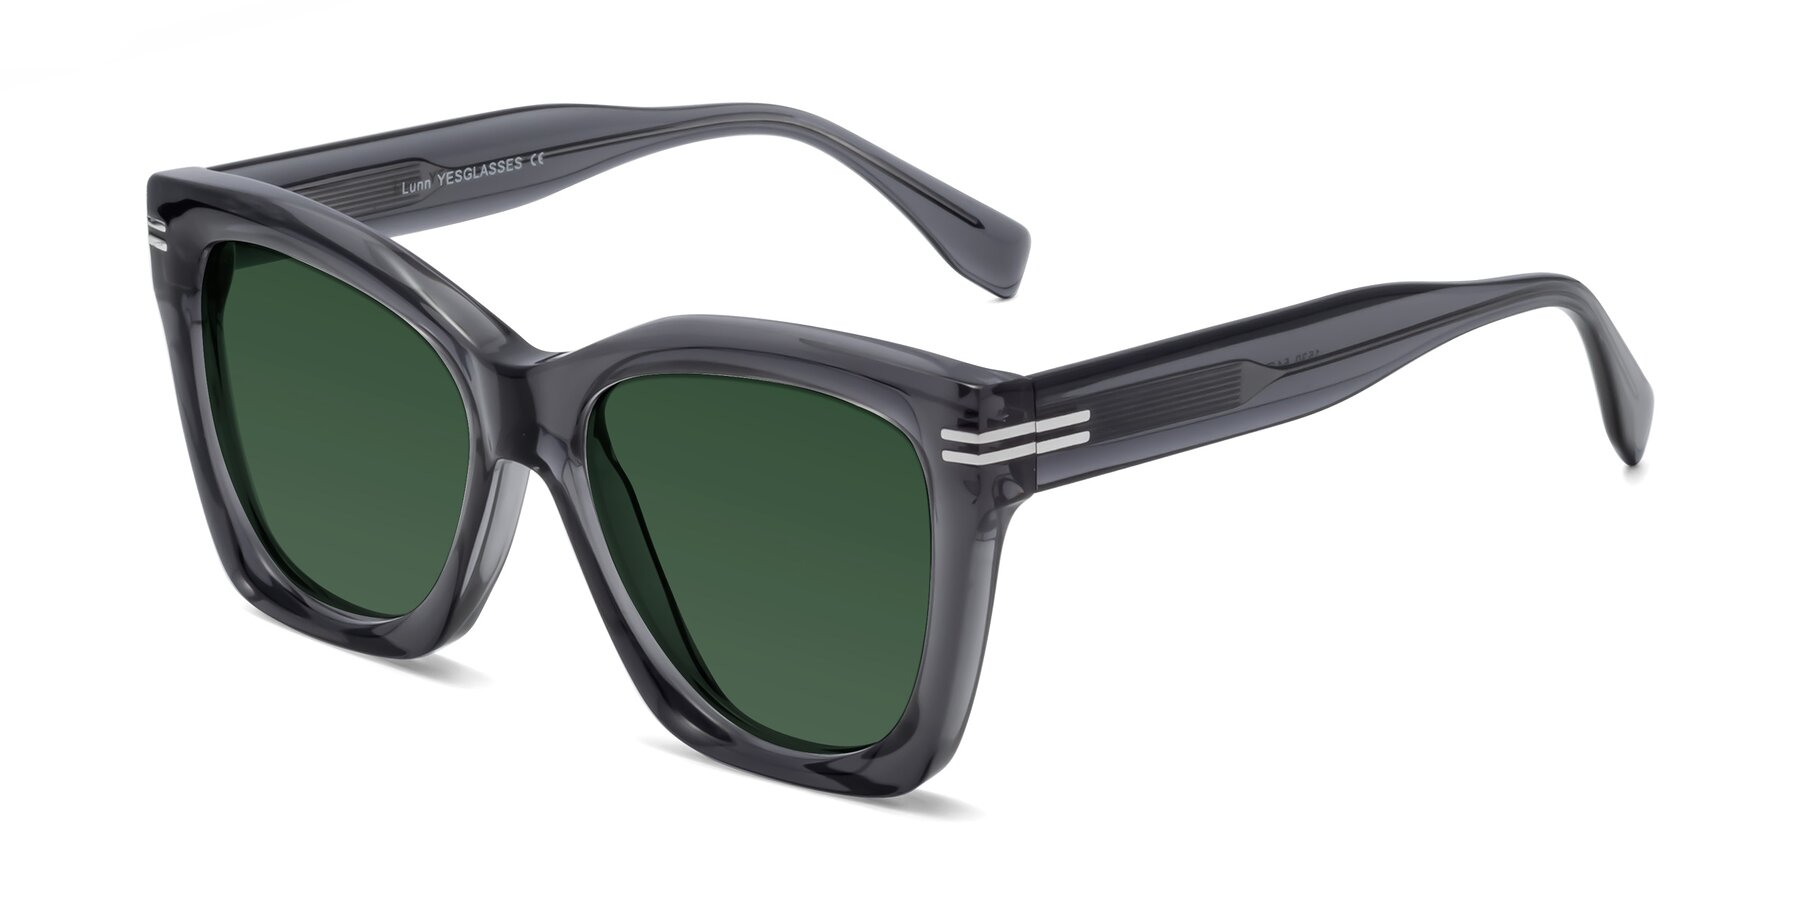 Angle of Lunn in Translucent Gray with Green Tinted Lenses